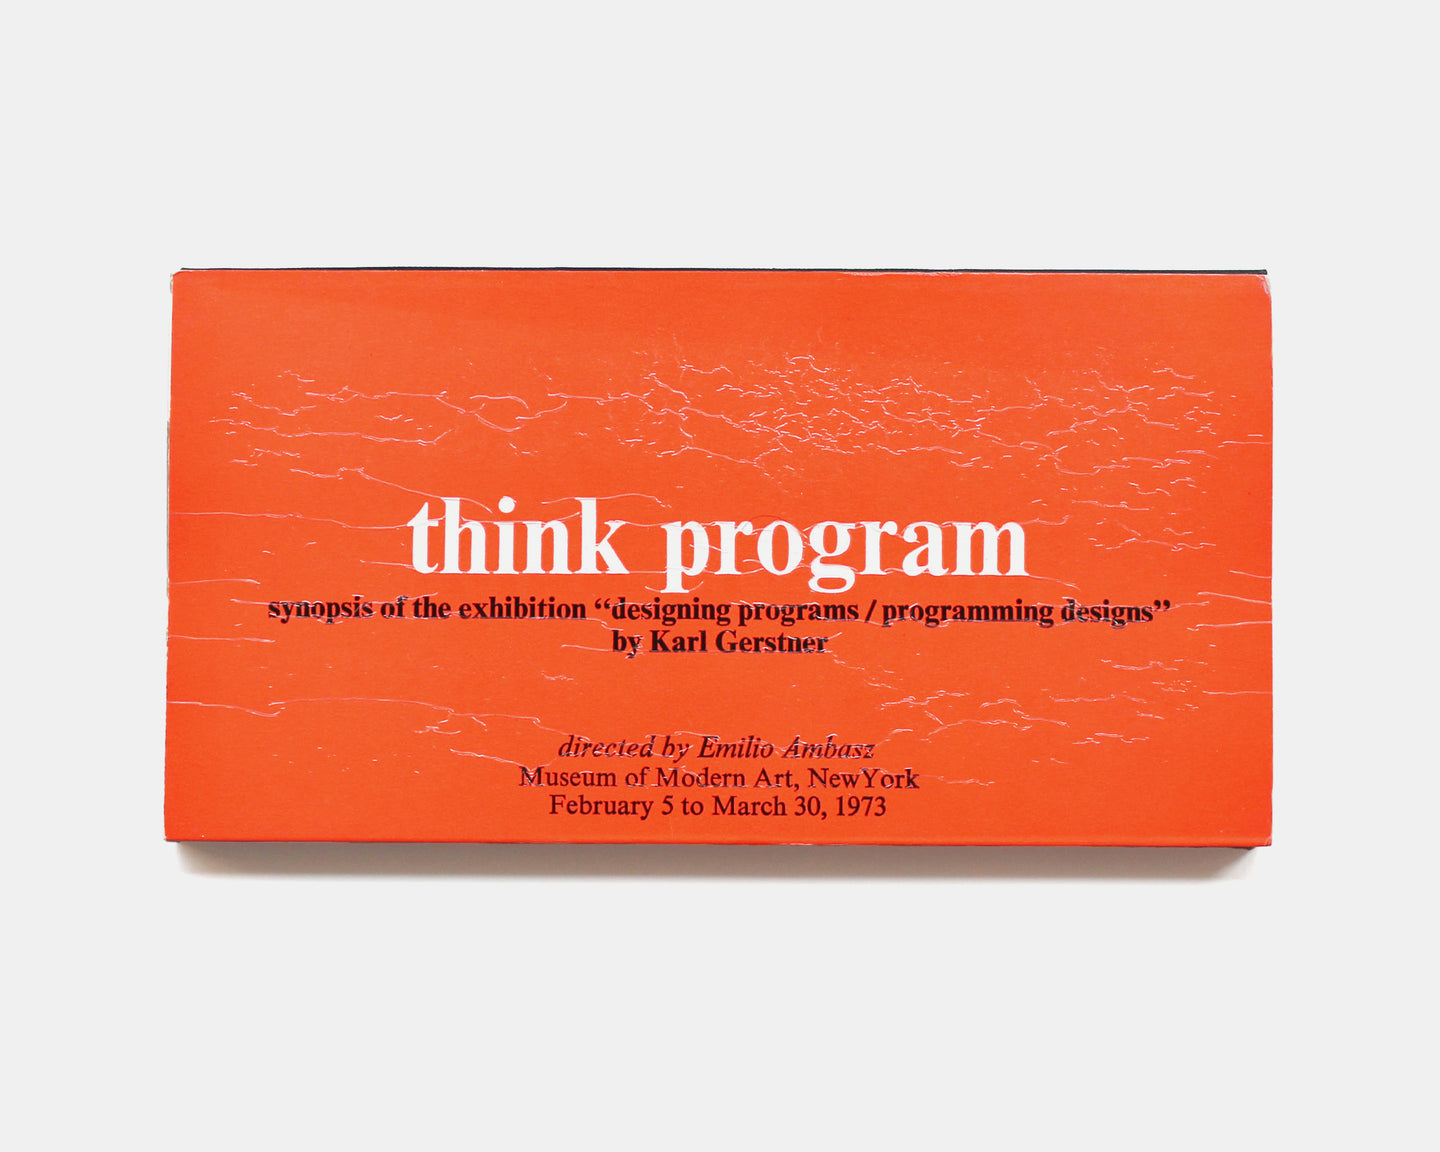 Think Program. Synopsis of the Exhibition “Designing Programs / Programming Designs”